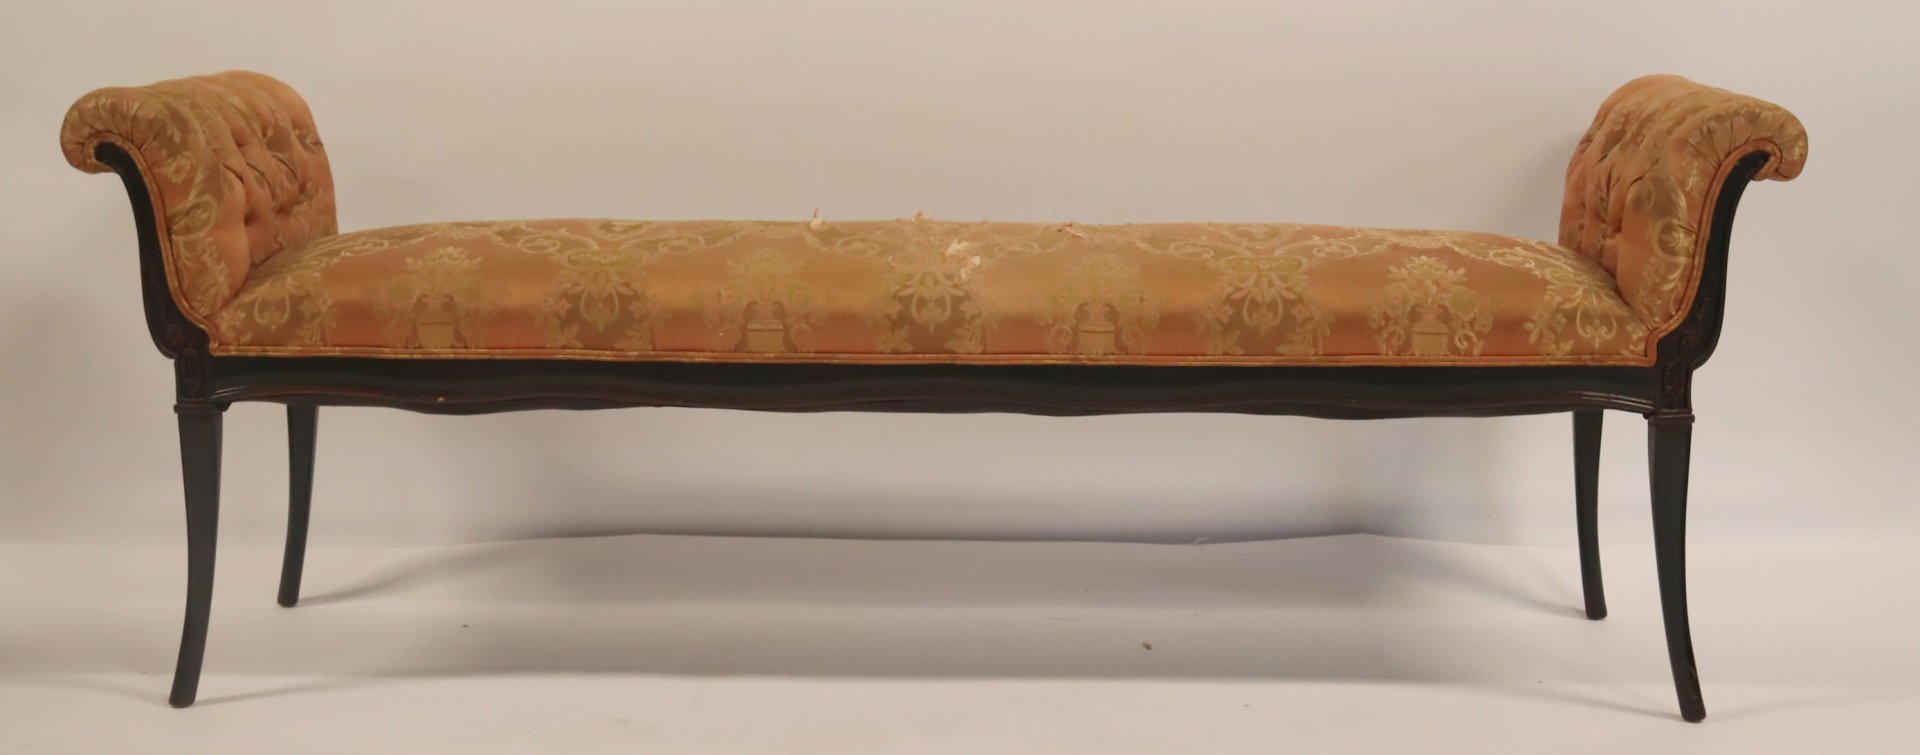 ANTIQUE UPHOLSTERED SCROLL ARM 3b7352